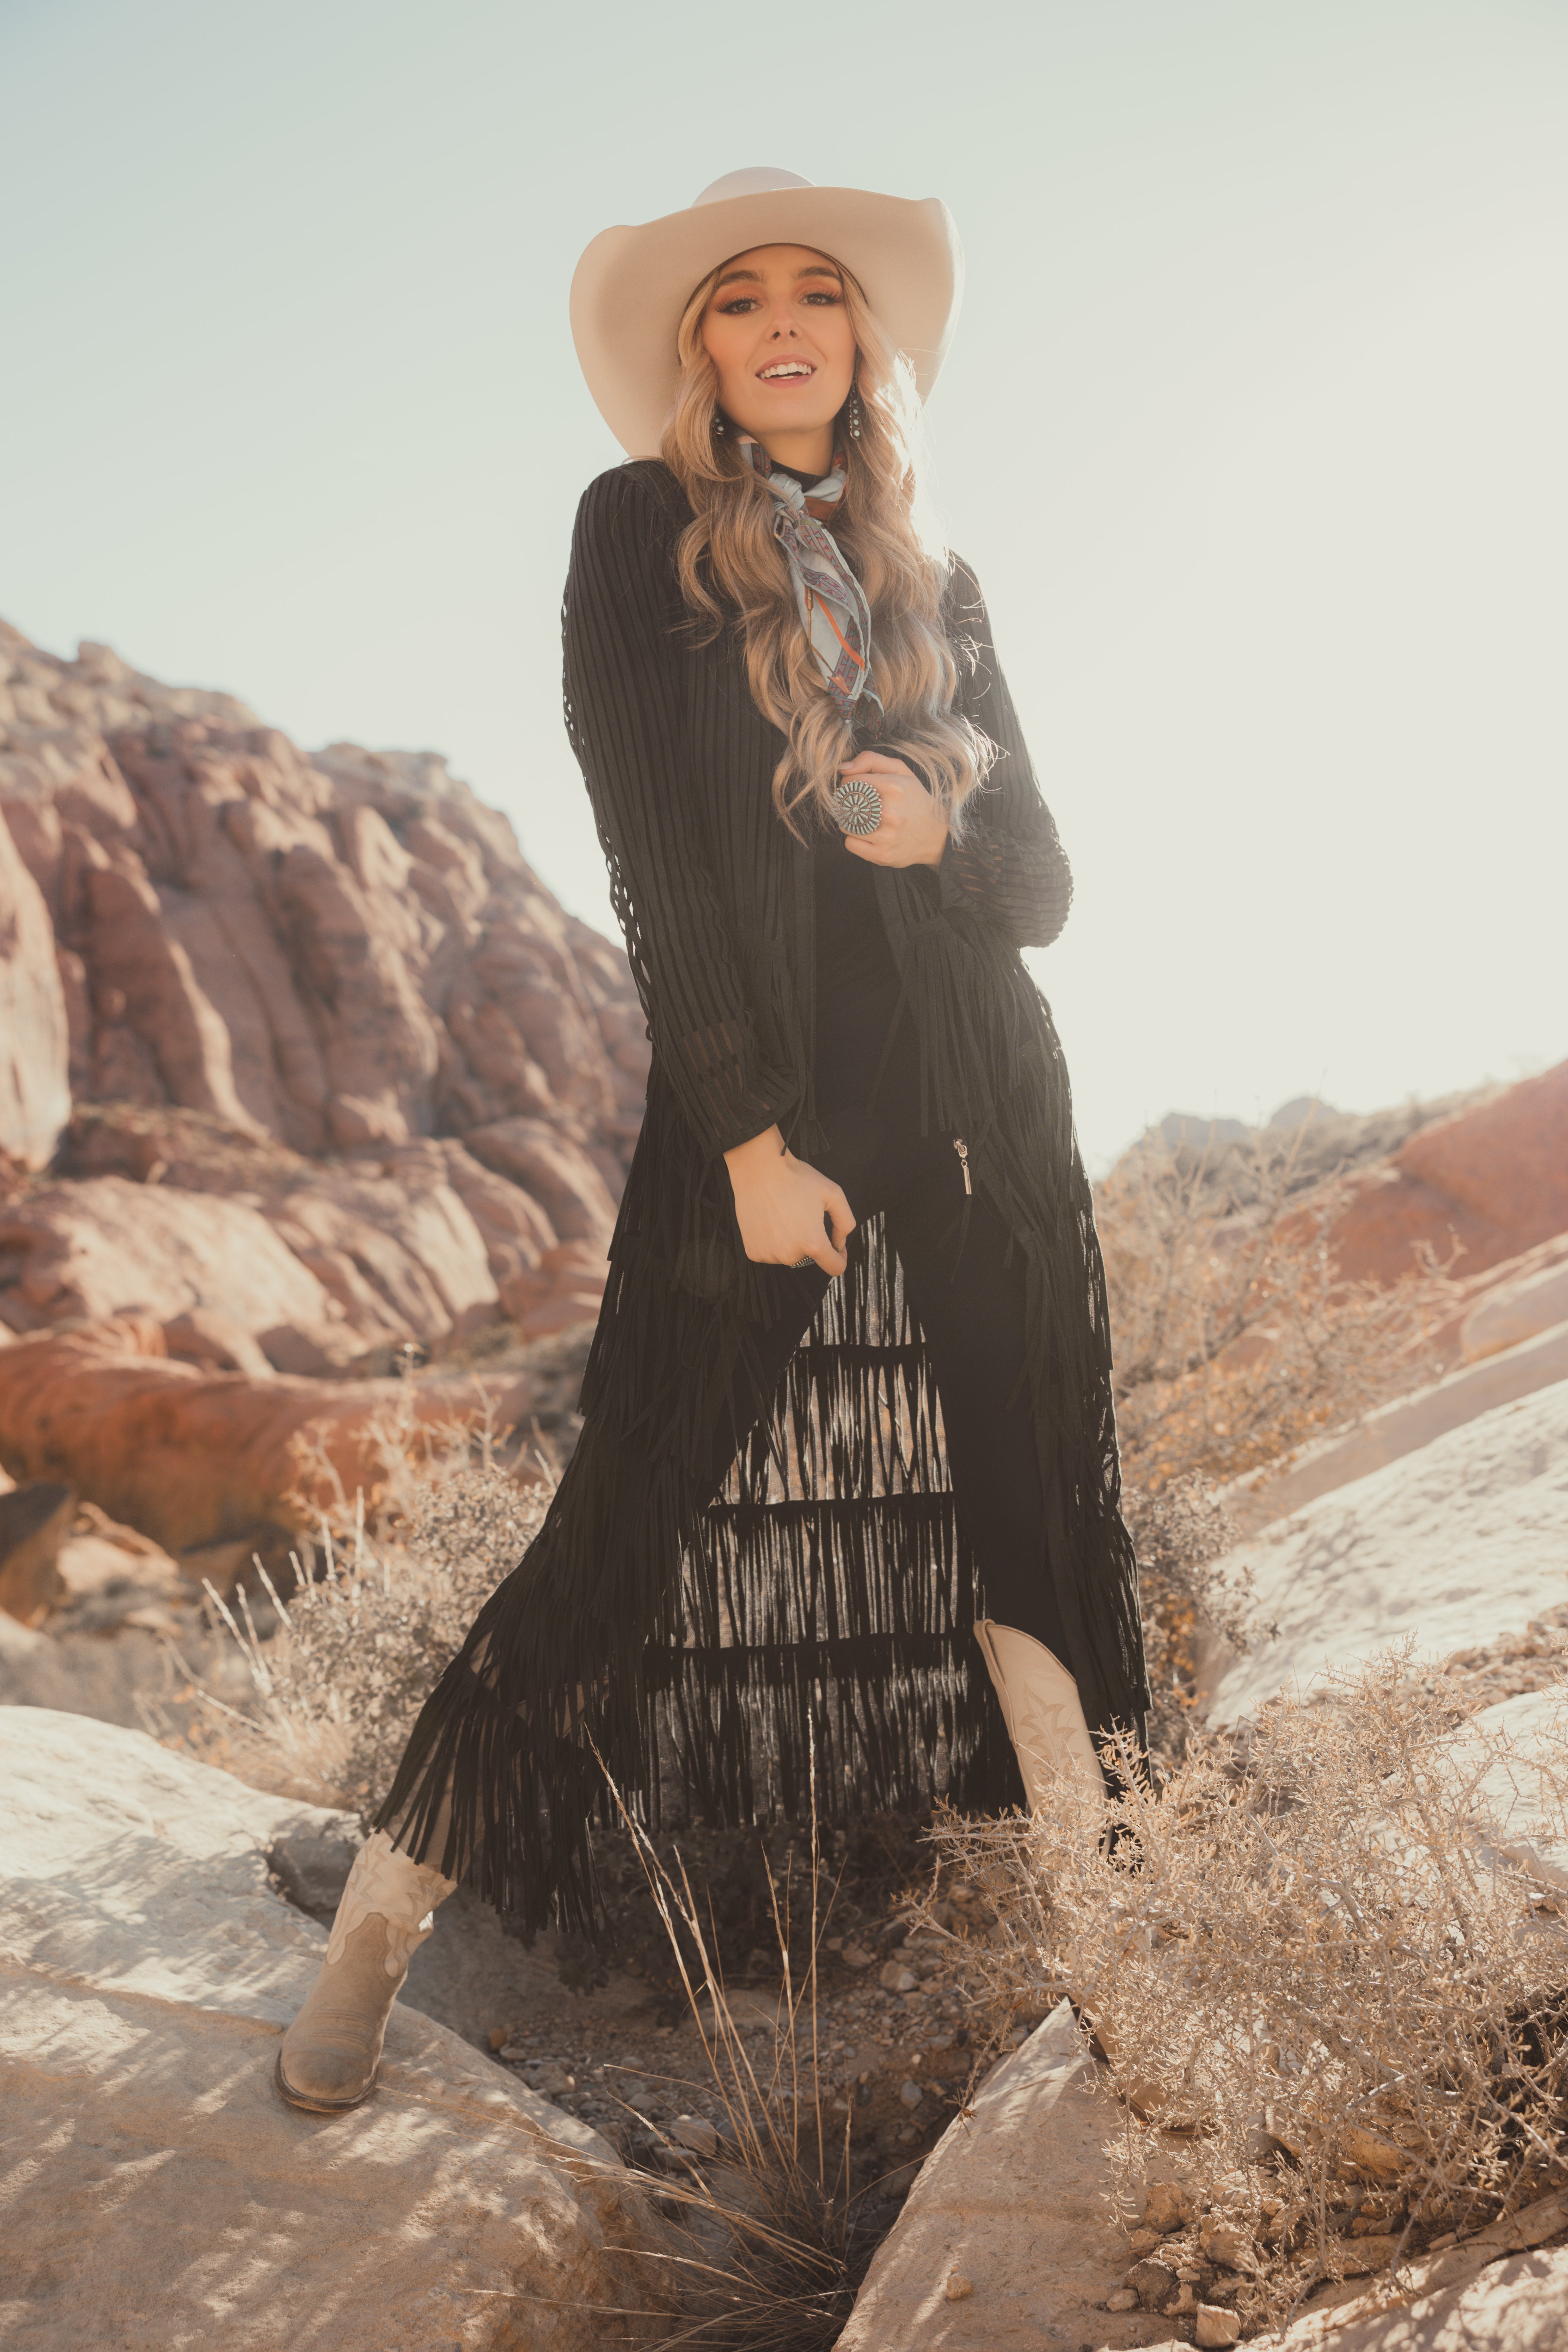 Ophelia Sequin Duster - $120 – Hand In Pocket